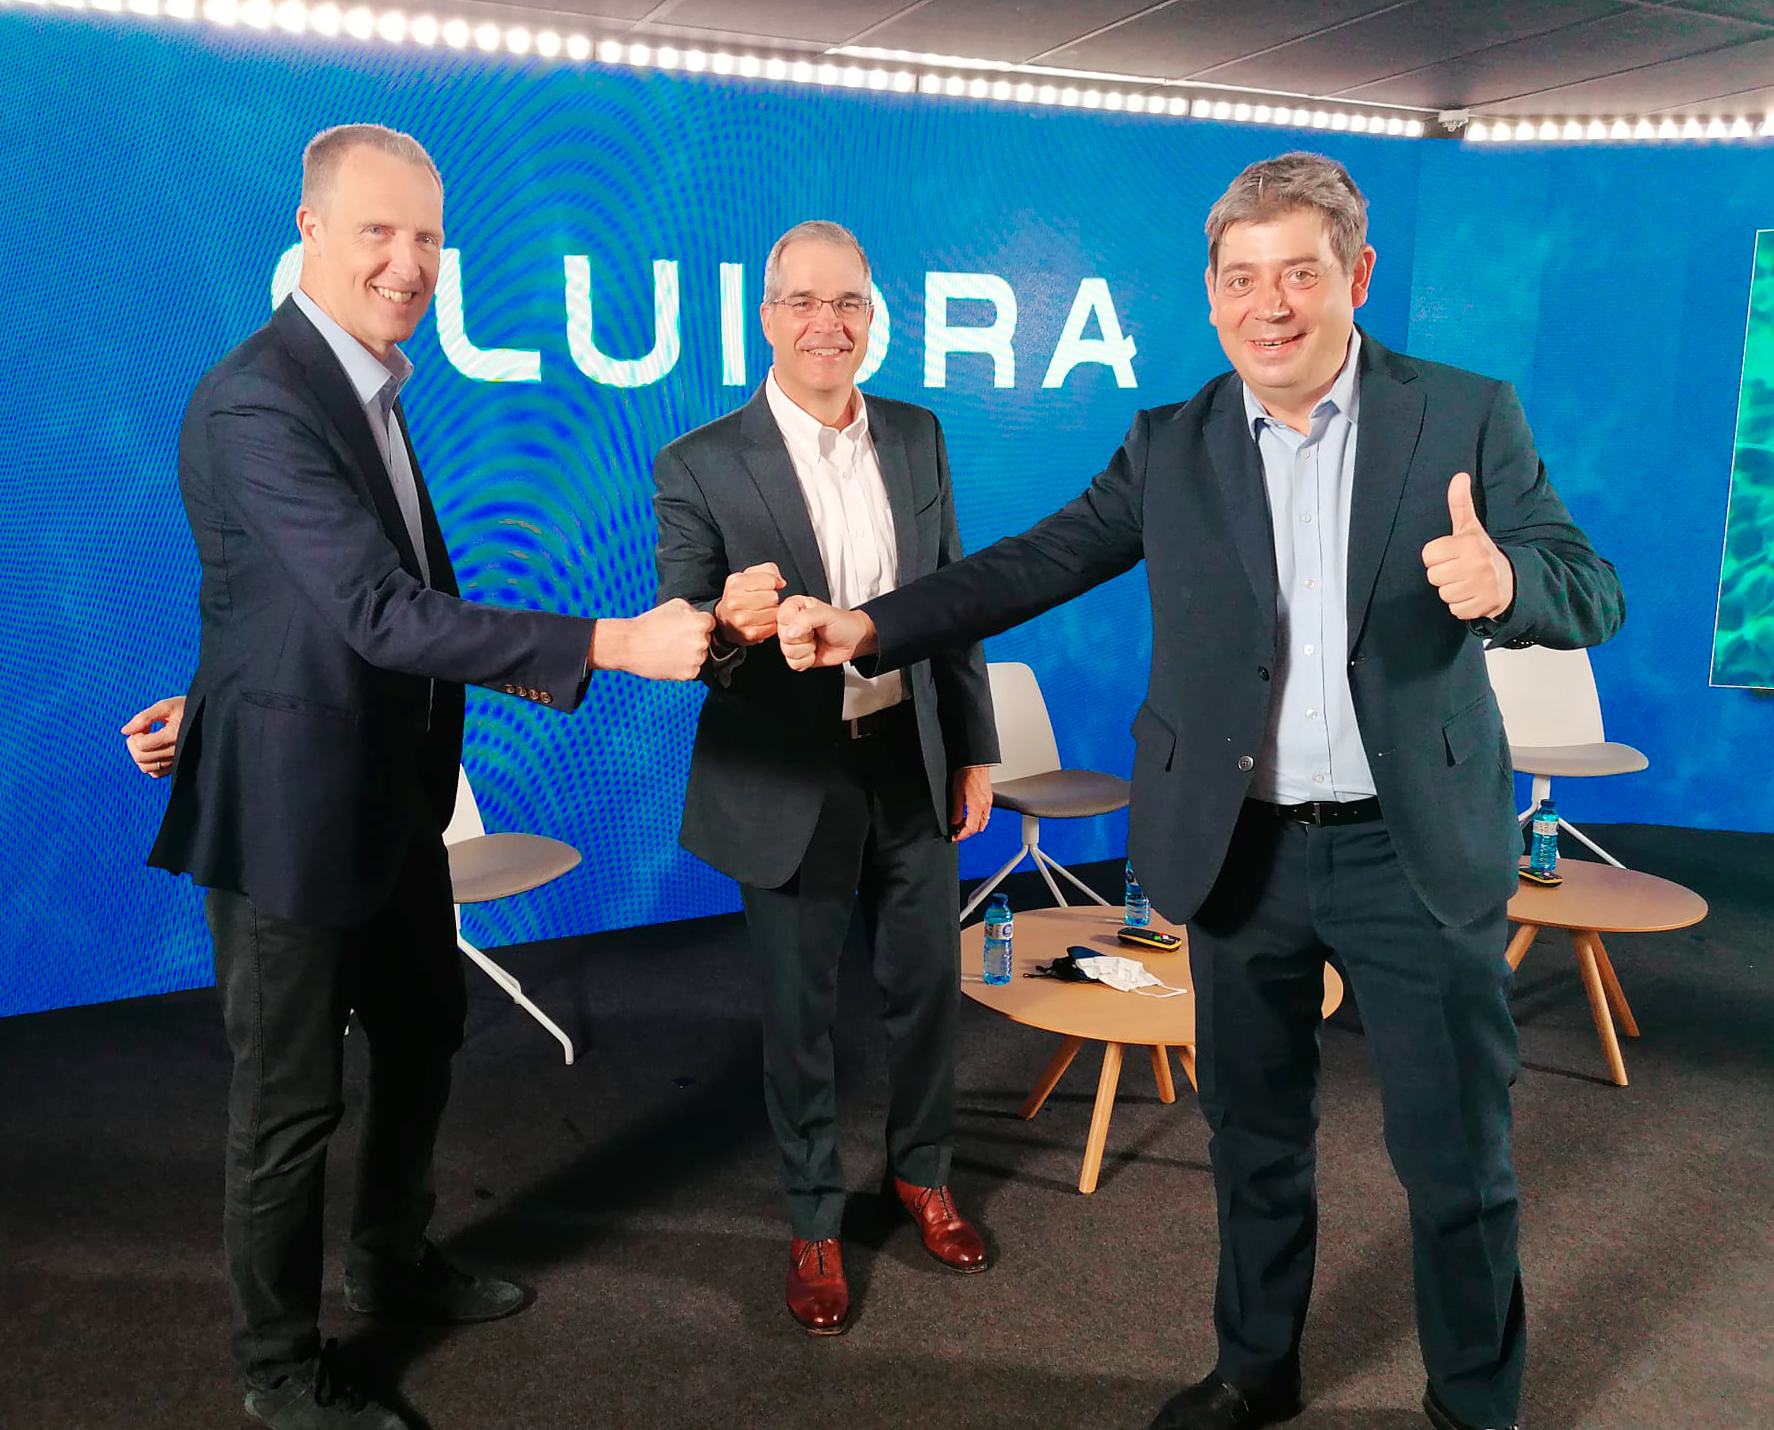 Fluidra wins several awards in the Institutional Investor 2021 “All-Europe Executive Team” ranking